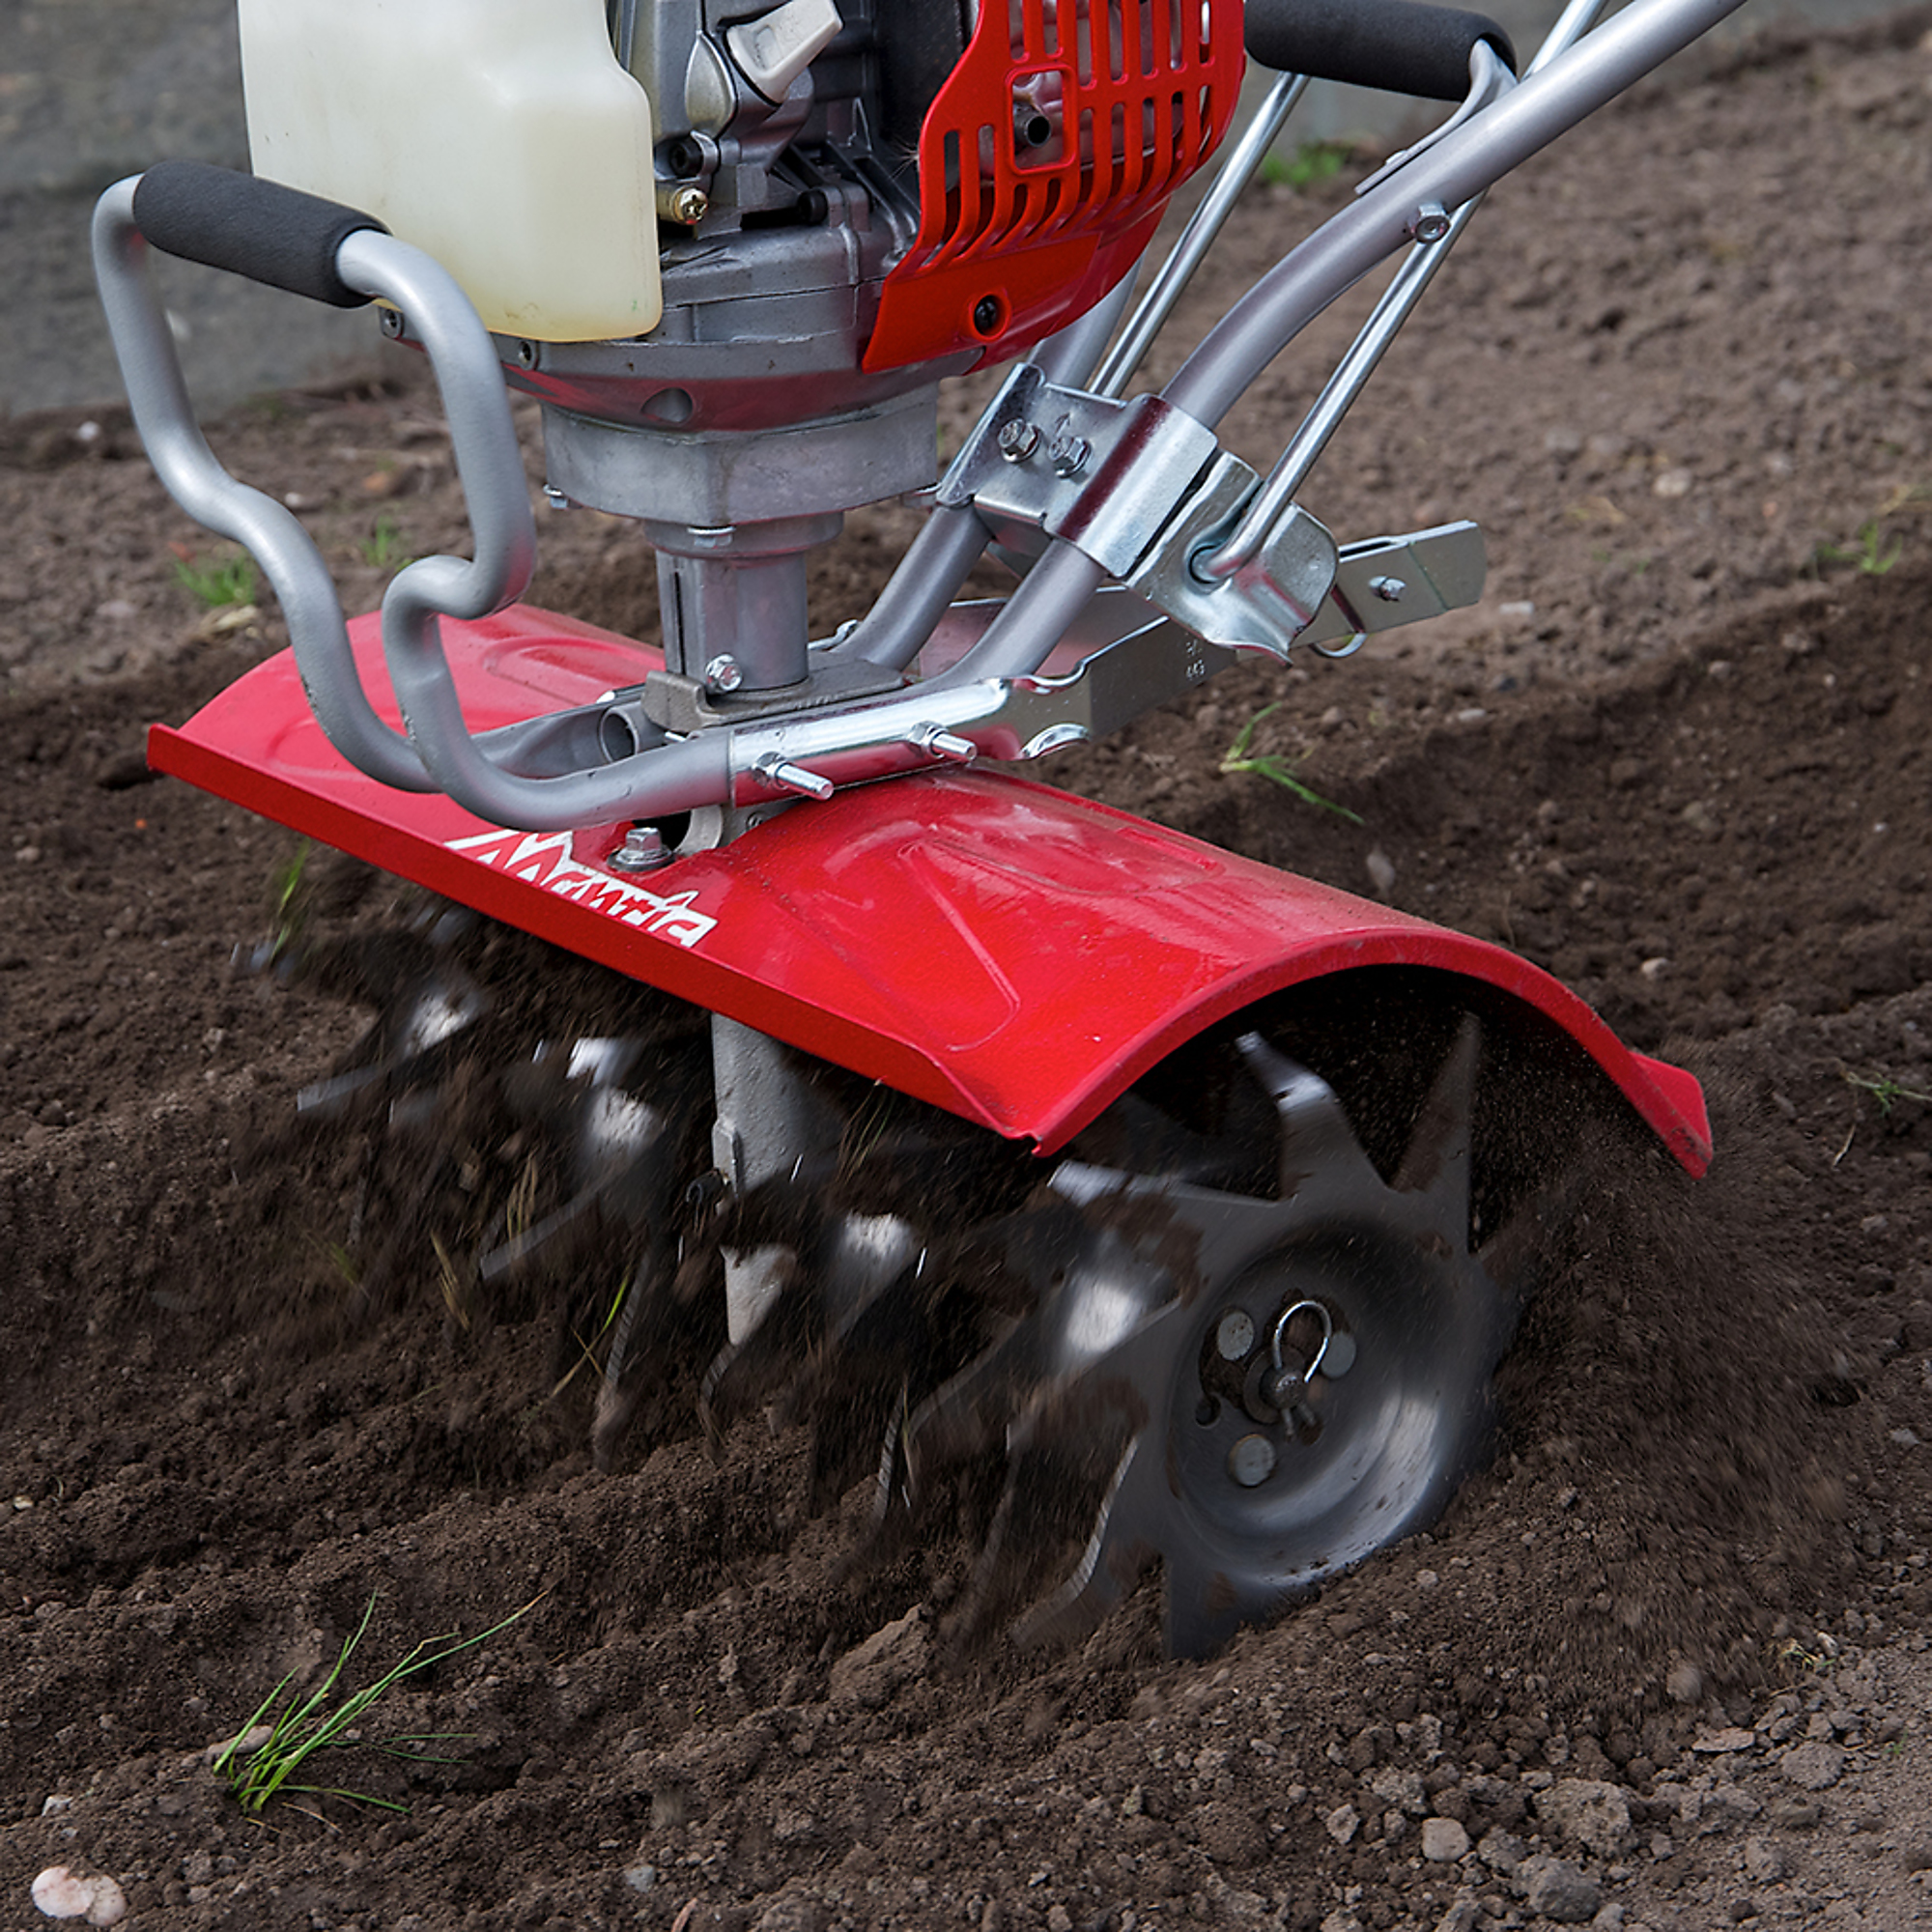 Mantis, 4-Cycle XP Tiller w/Kickstand || Honda GX35 engine, Max. Working Width 16 in, Engine Displacement 35 cc, Model 7566A